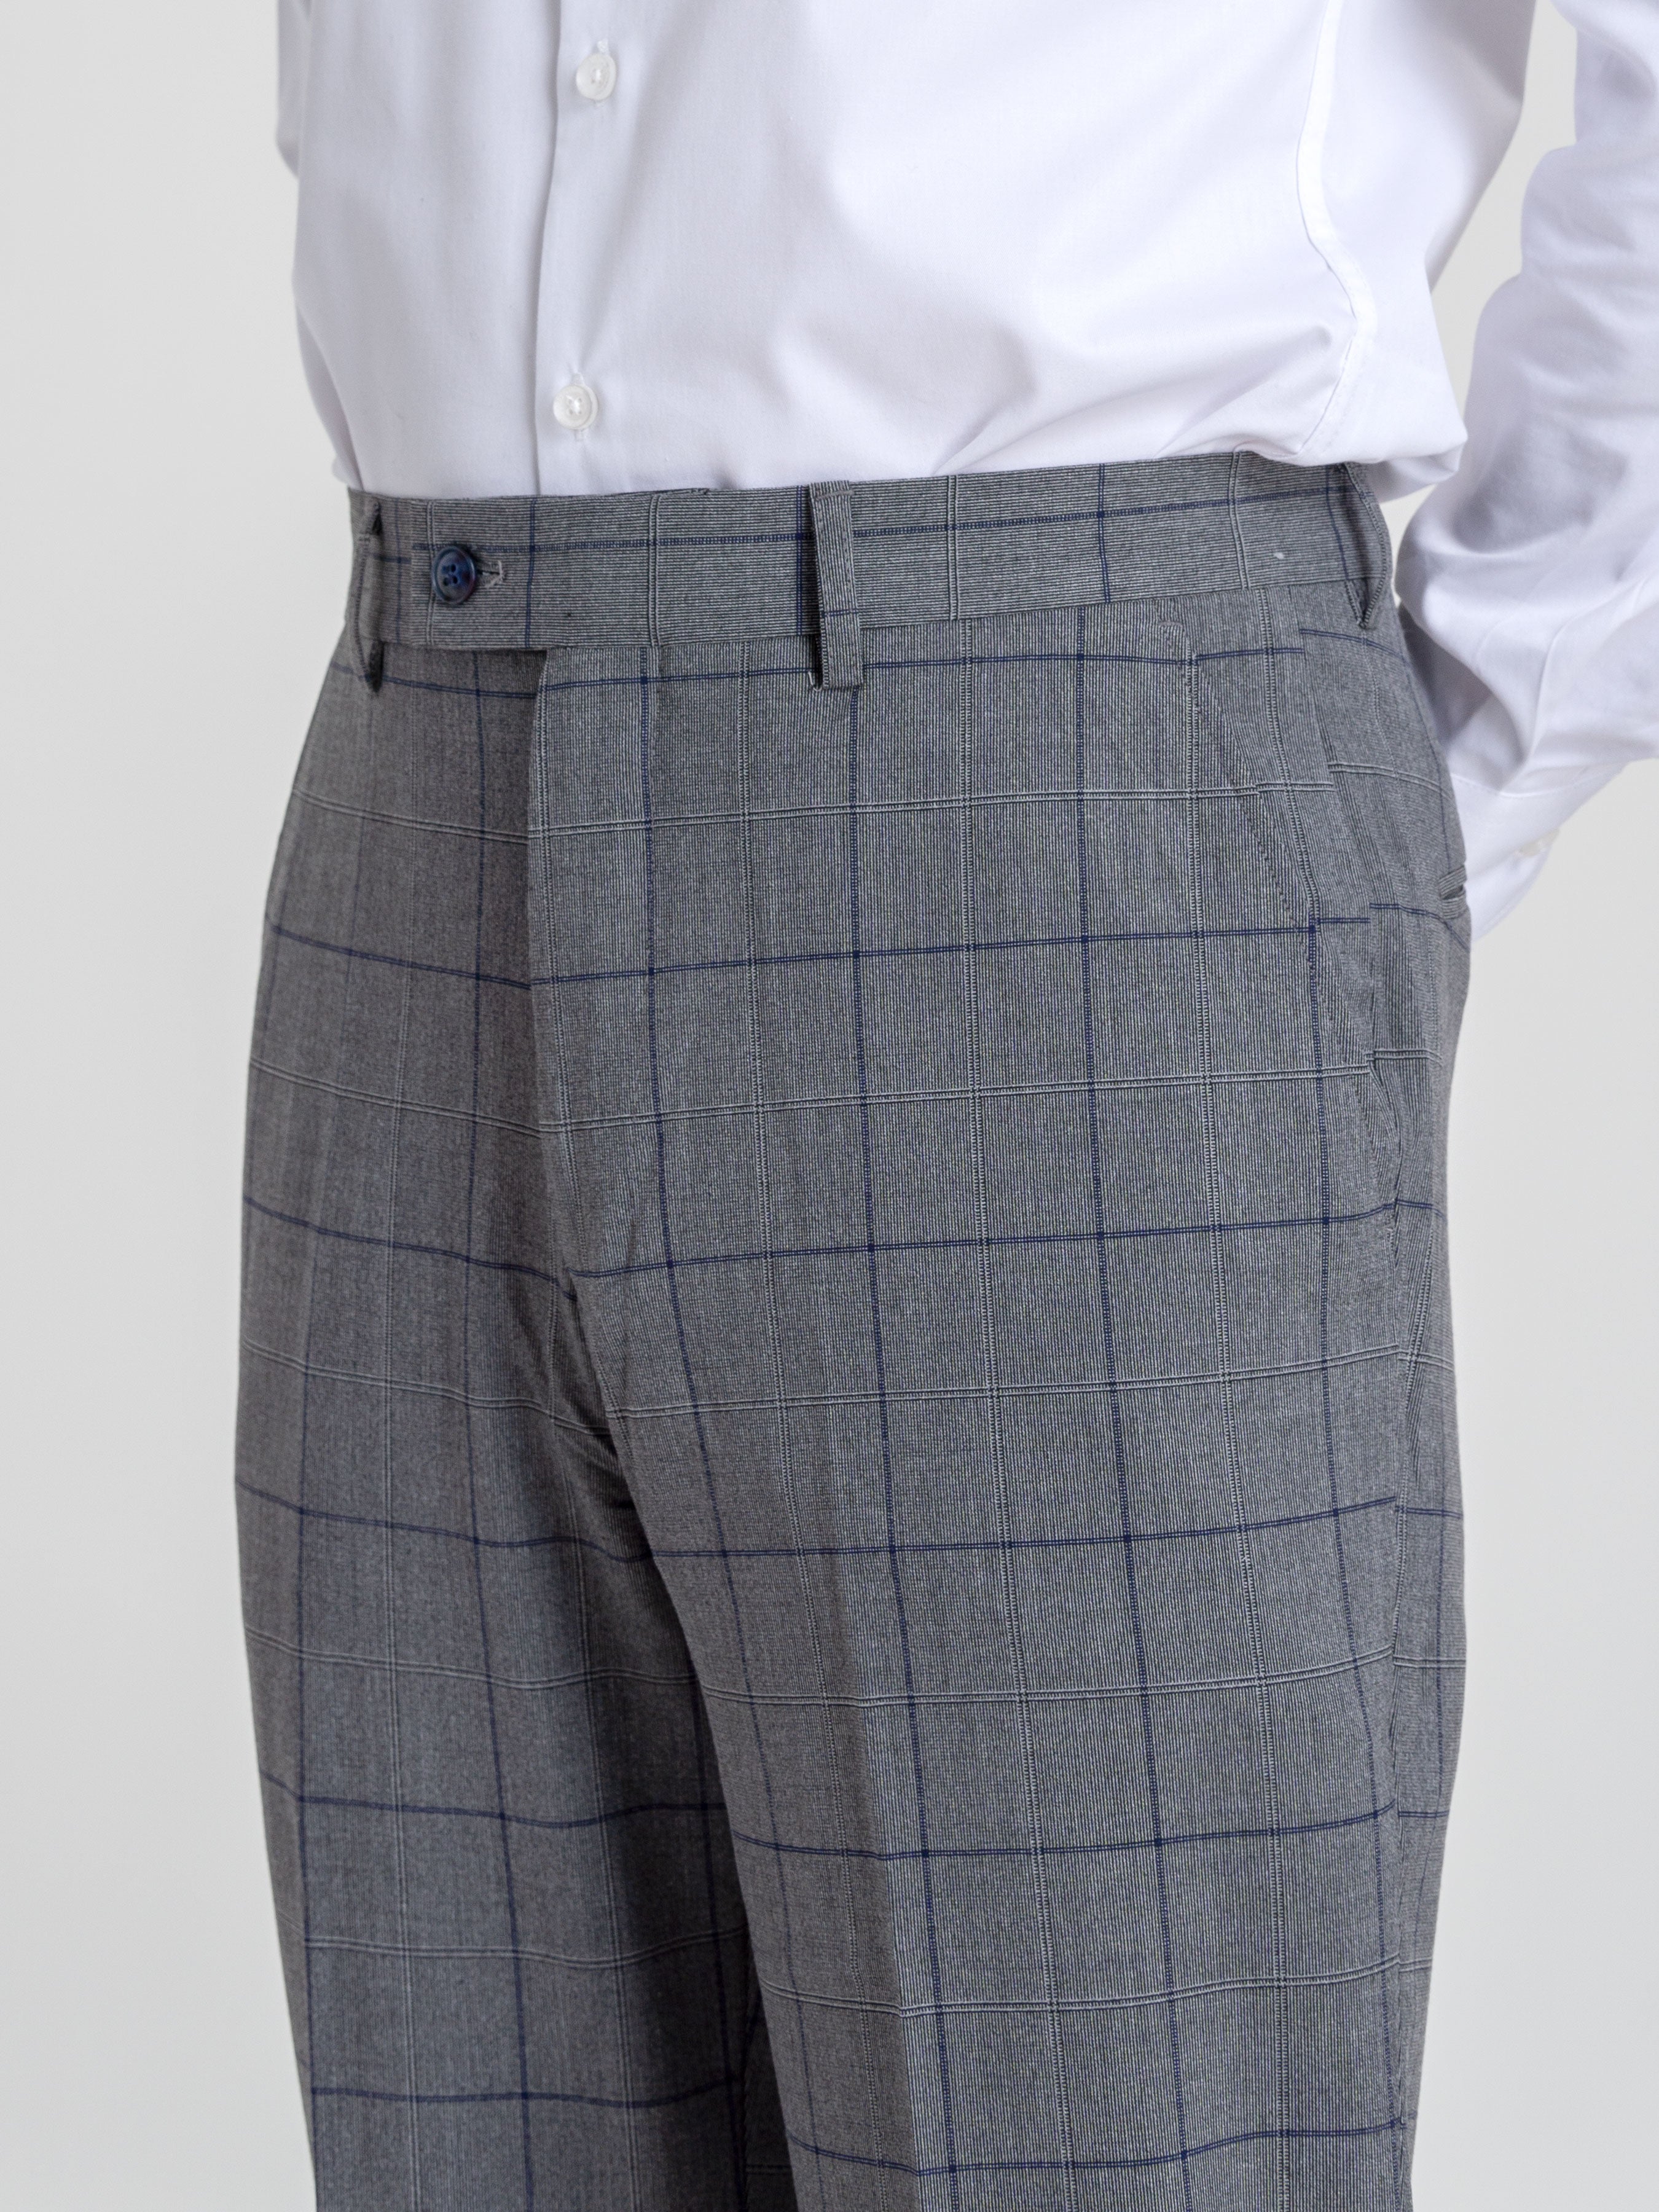 Trousers With Belt Loop - Dark Grey With Blue Line Windowpane Checkere ...